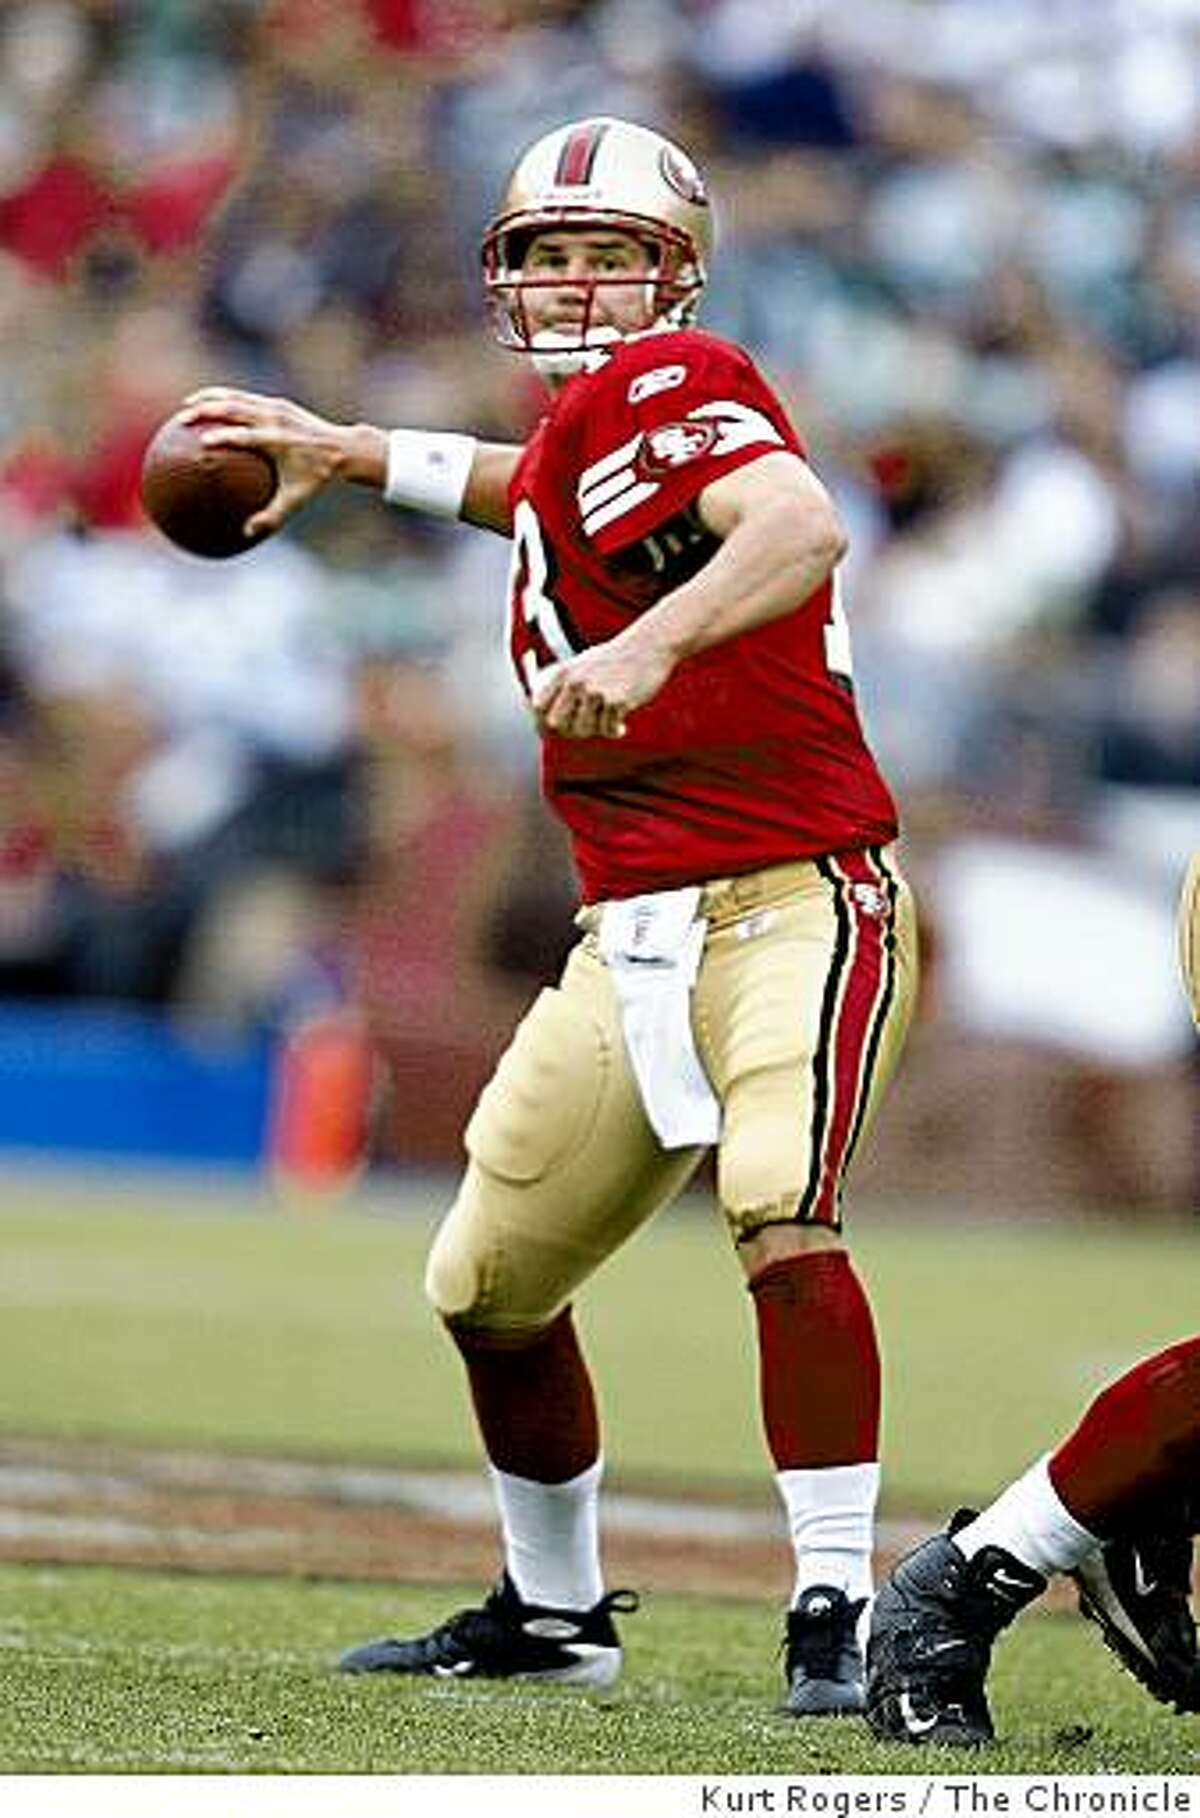 Shaun Hill looks for a open receiver in the 3rd quarter on Sunday Dec 7, 2008 in San Francisco.